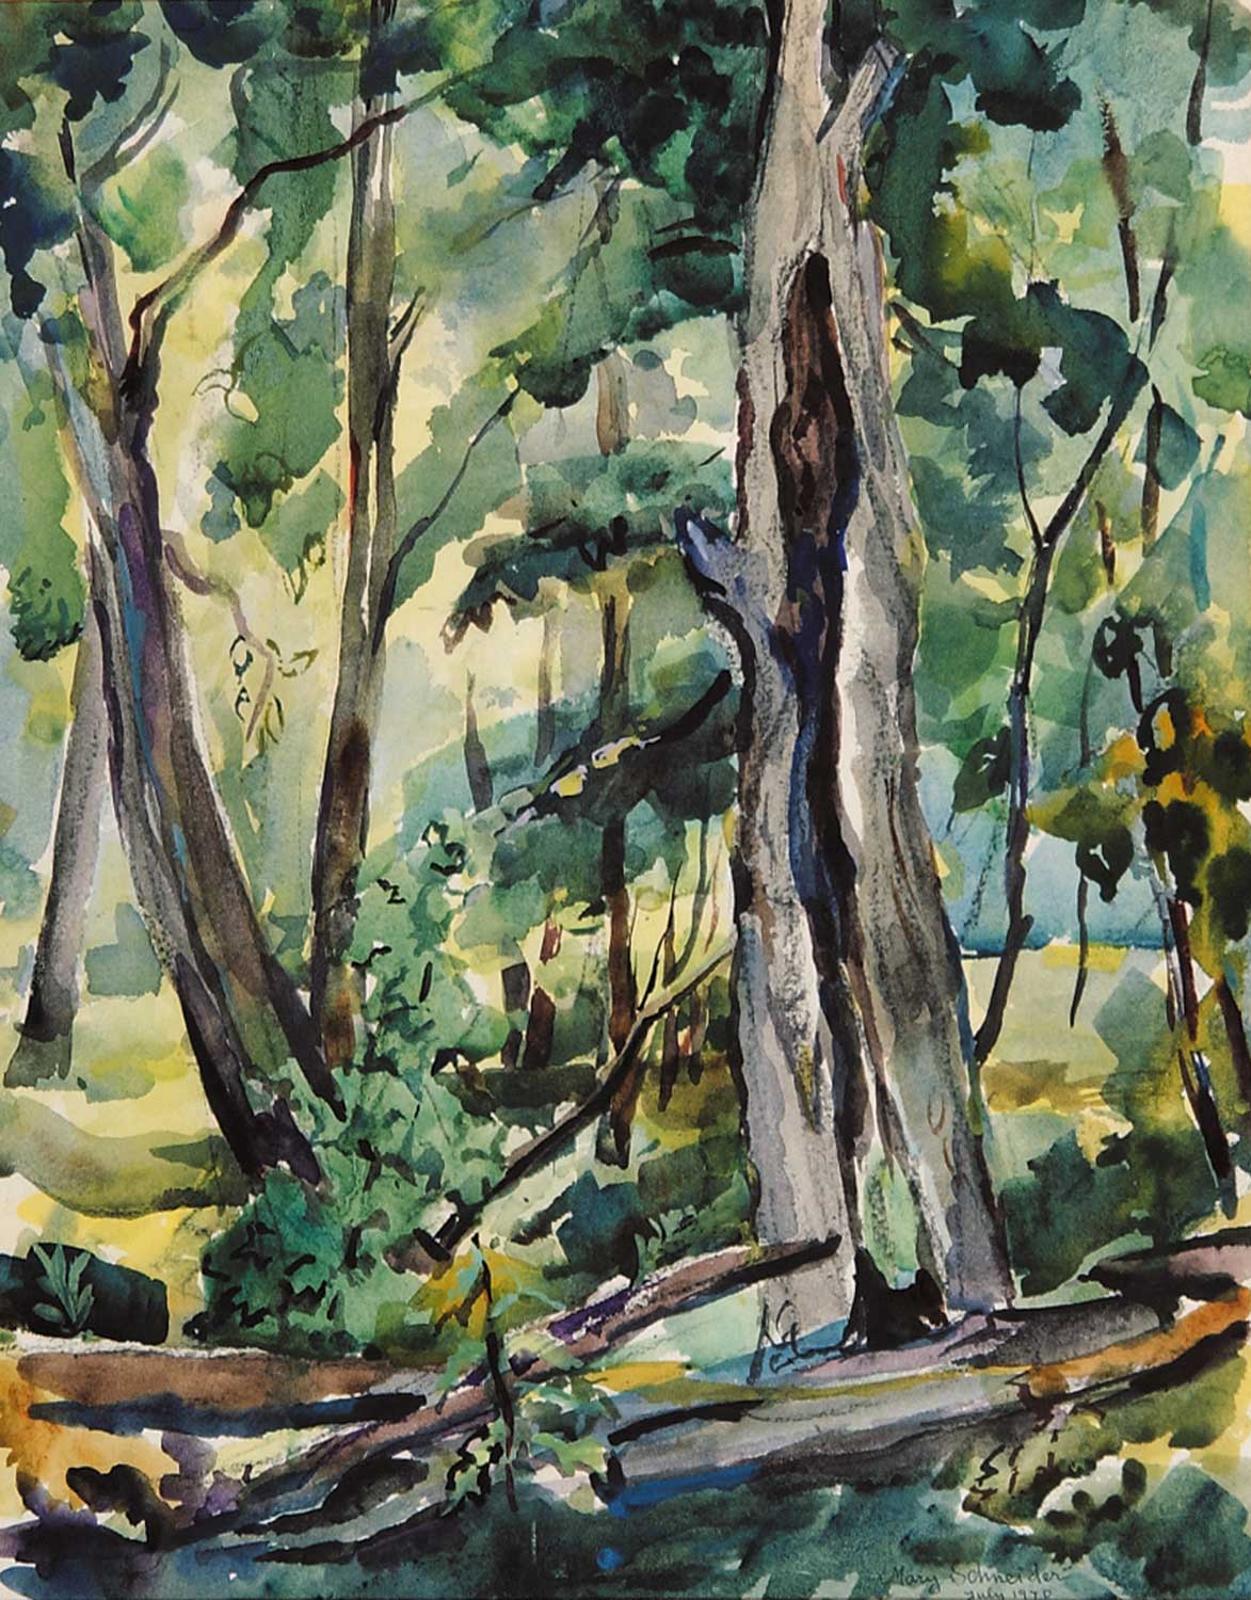 Mary Schneider (1900-1992) - Untitled - In the Forest